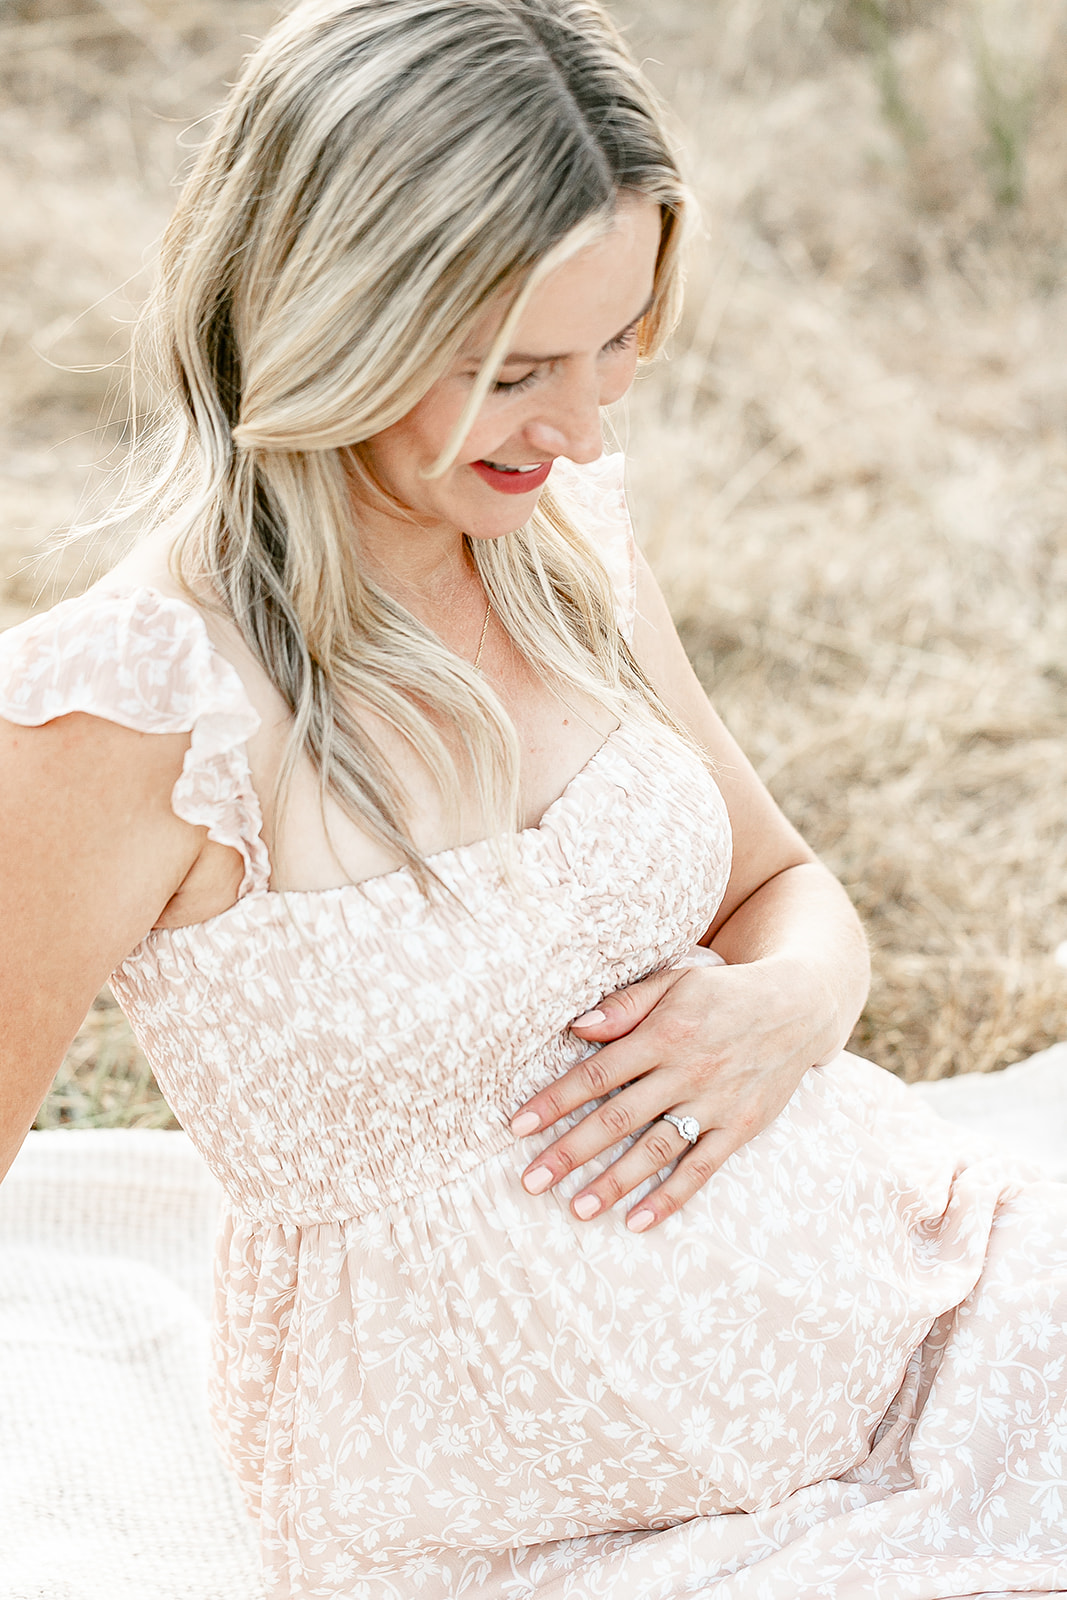 A mother-to-be sits on a blanket in a grassy field while looking down at her bump in a beige dress Portland prenatal yoga